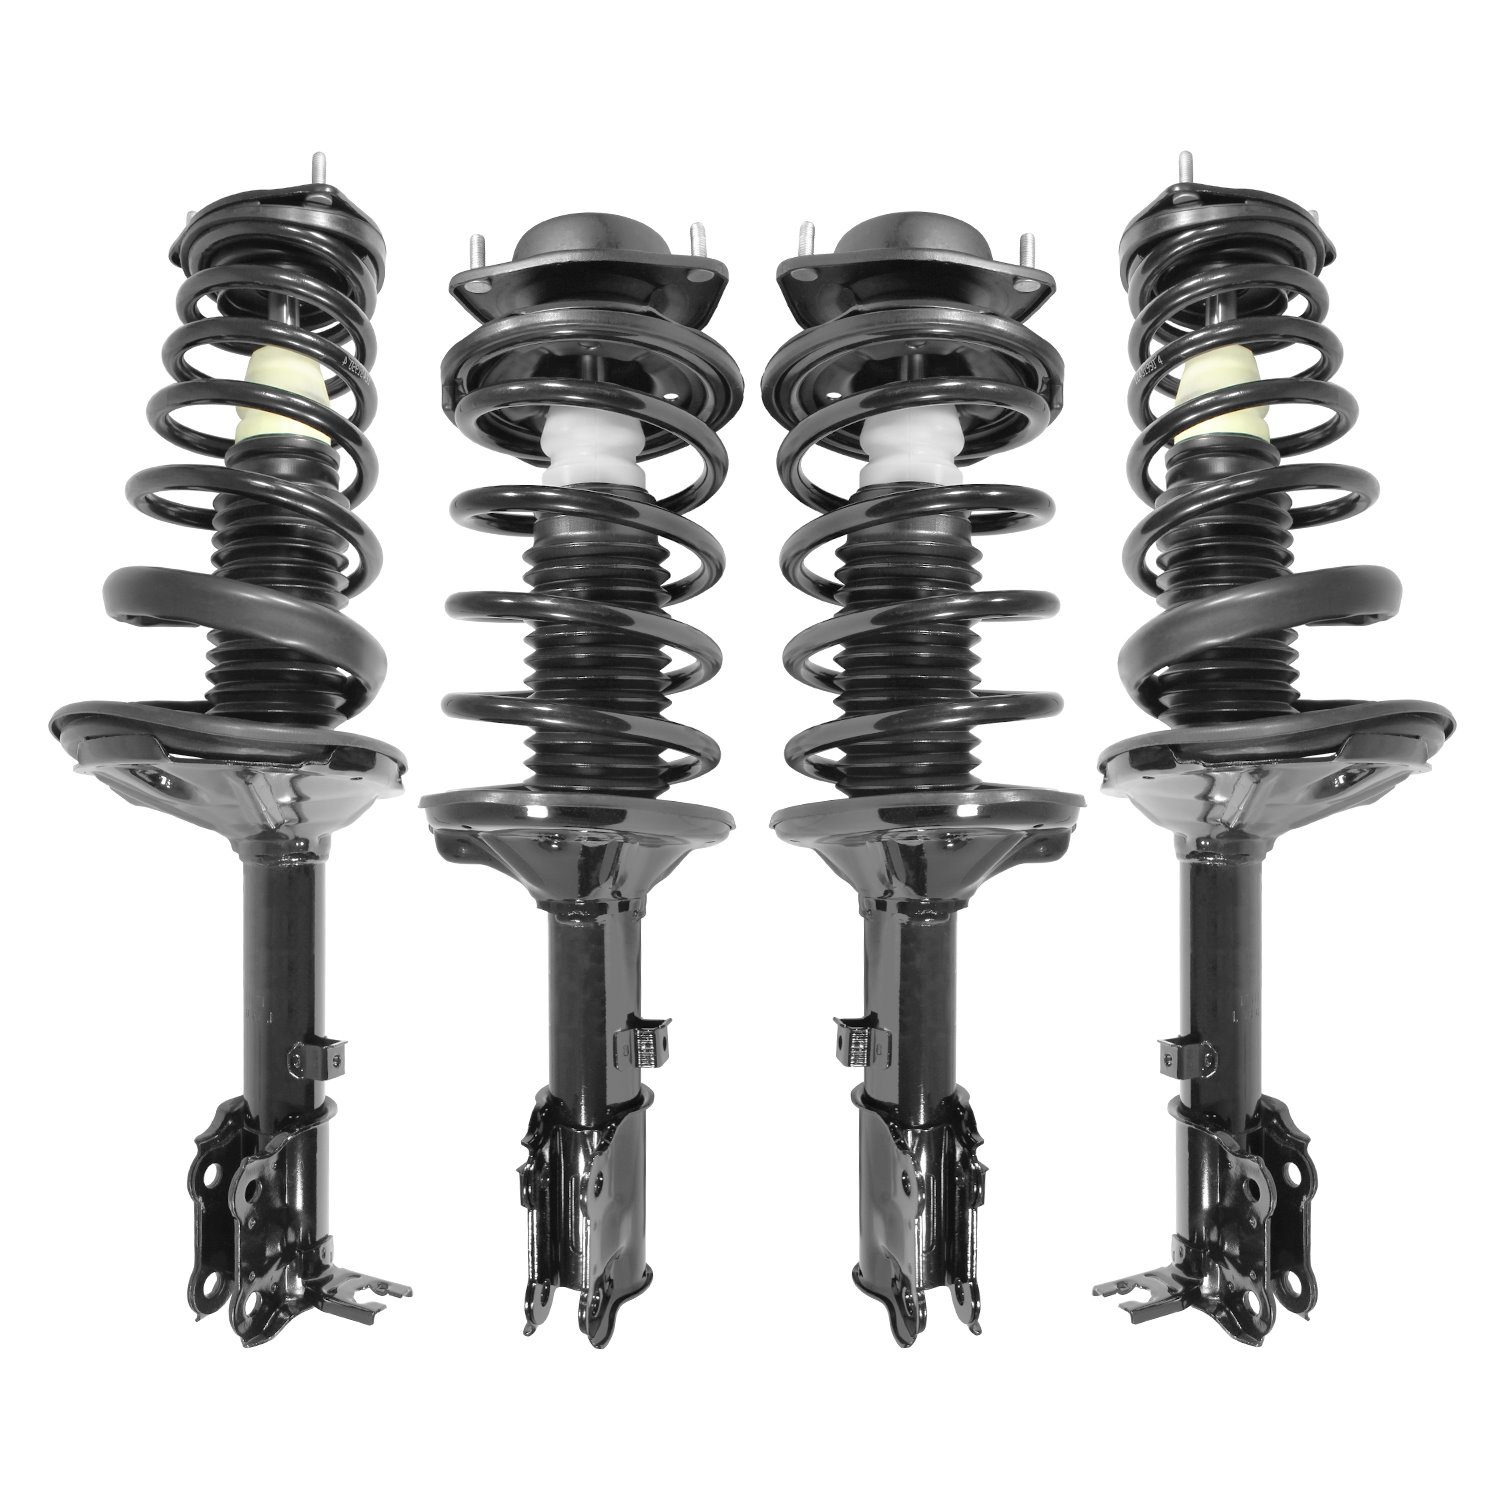 4-11141-15111-001 Front & Rear Suspension Strut & Coil Spring Assembly Kit Fits Select Hyundai Accent